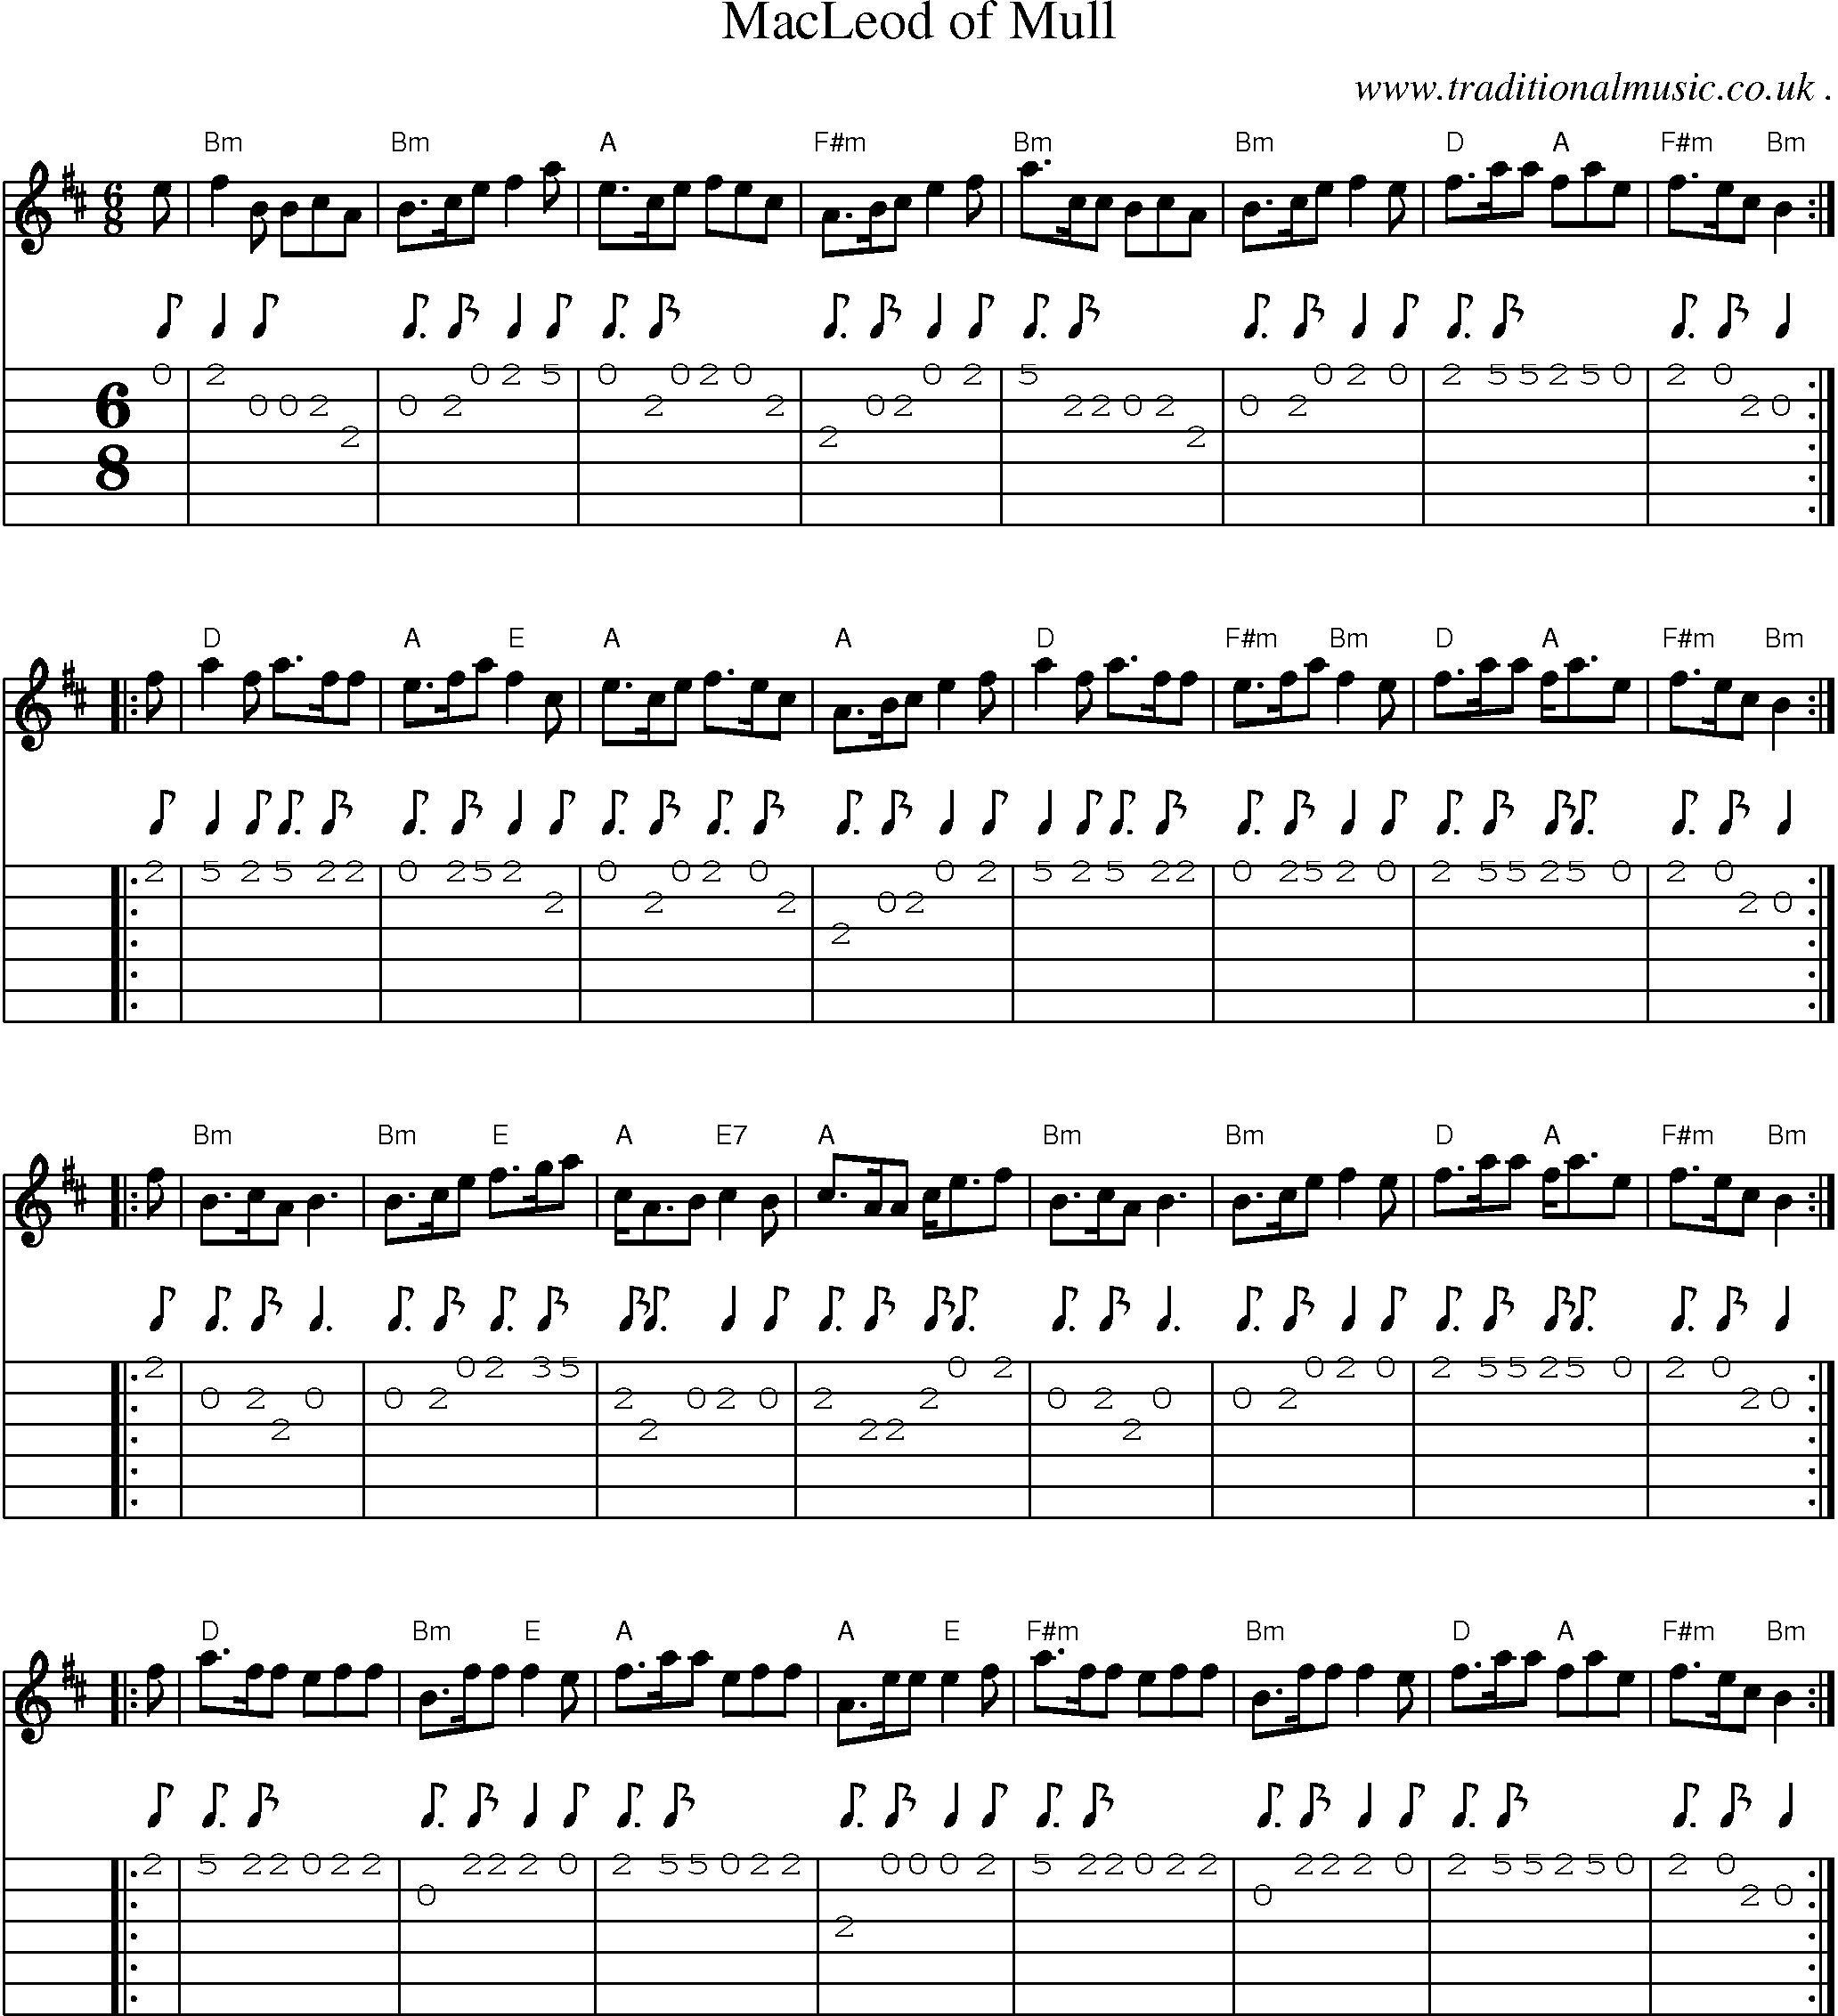 Sheet-music  score, Chords and Guitar Tabs for Macleod Of Mull